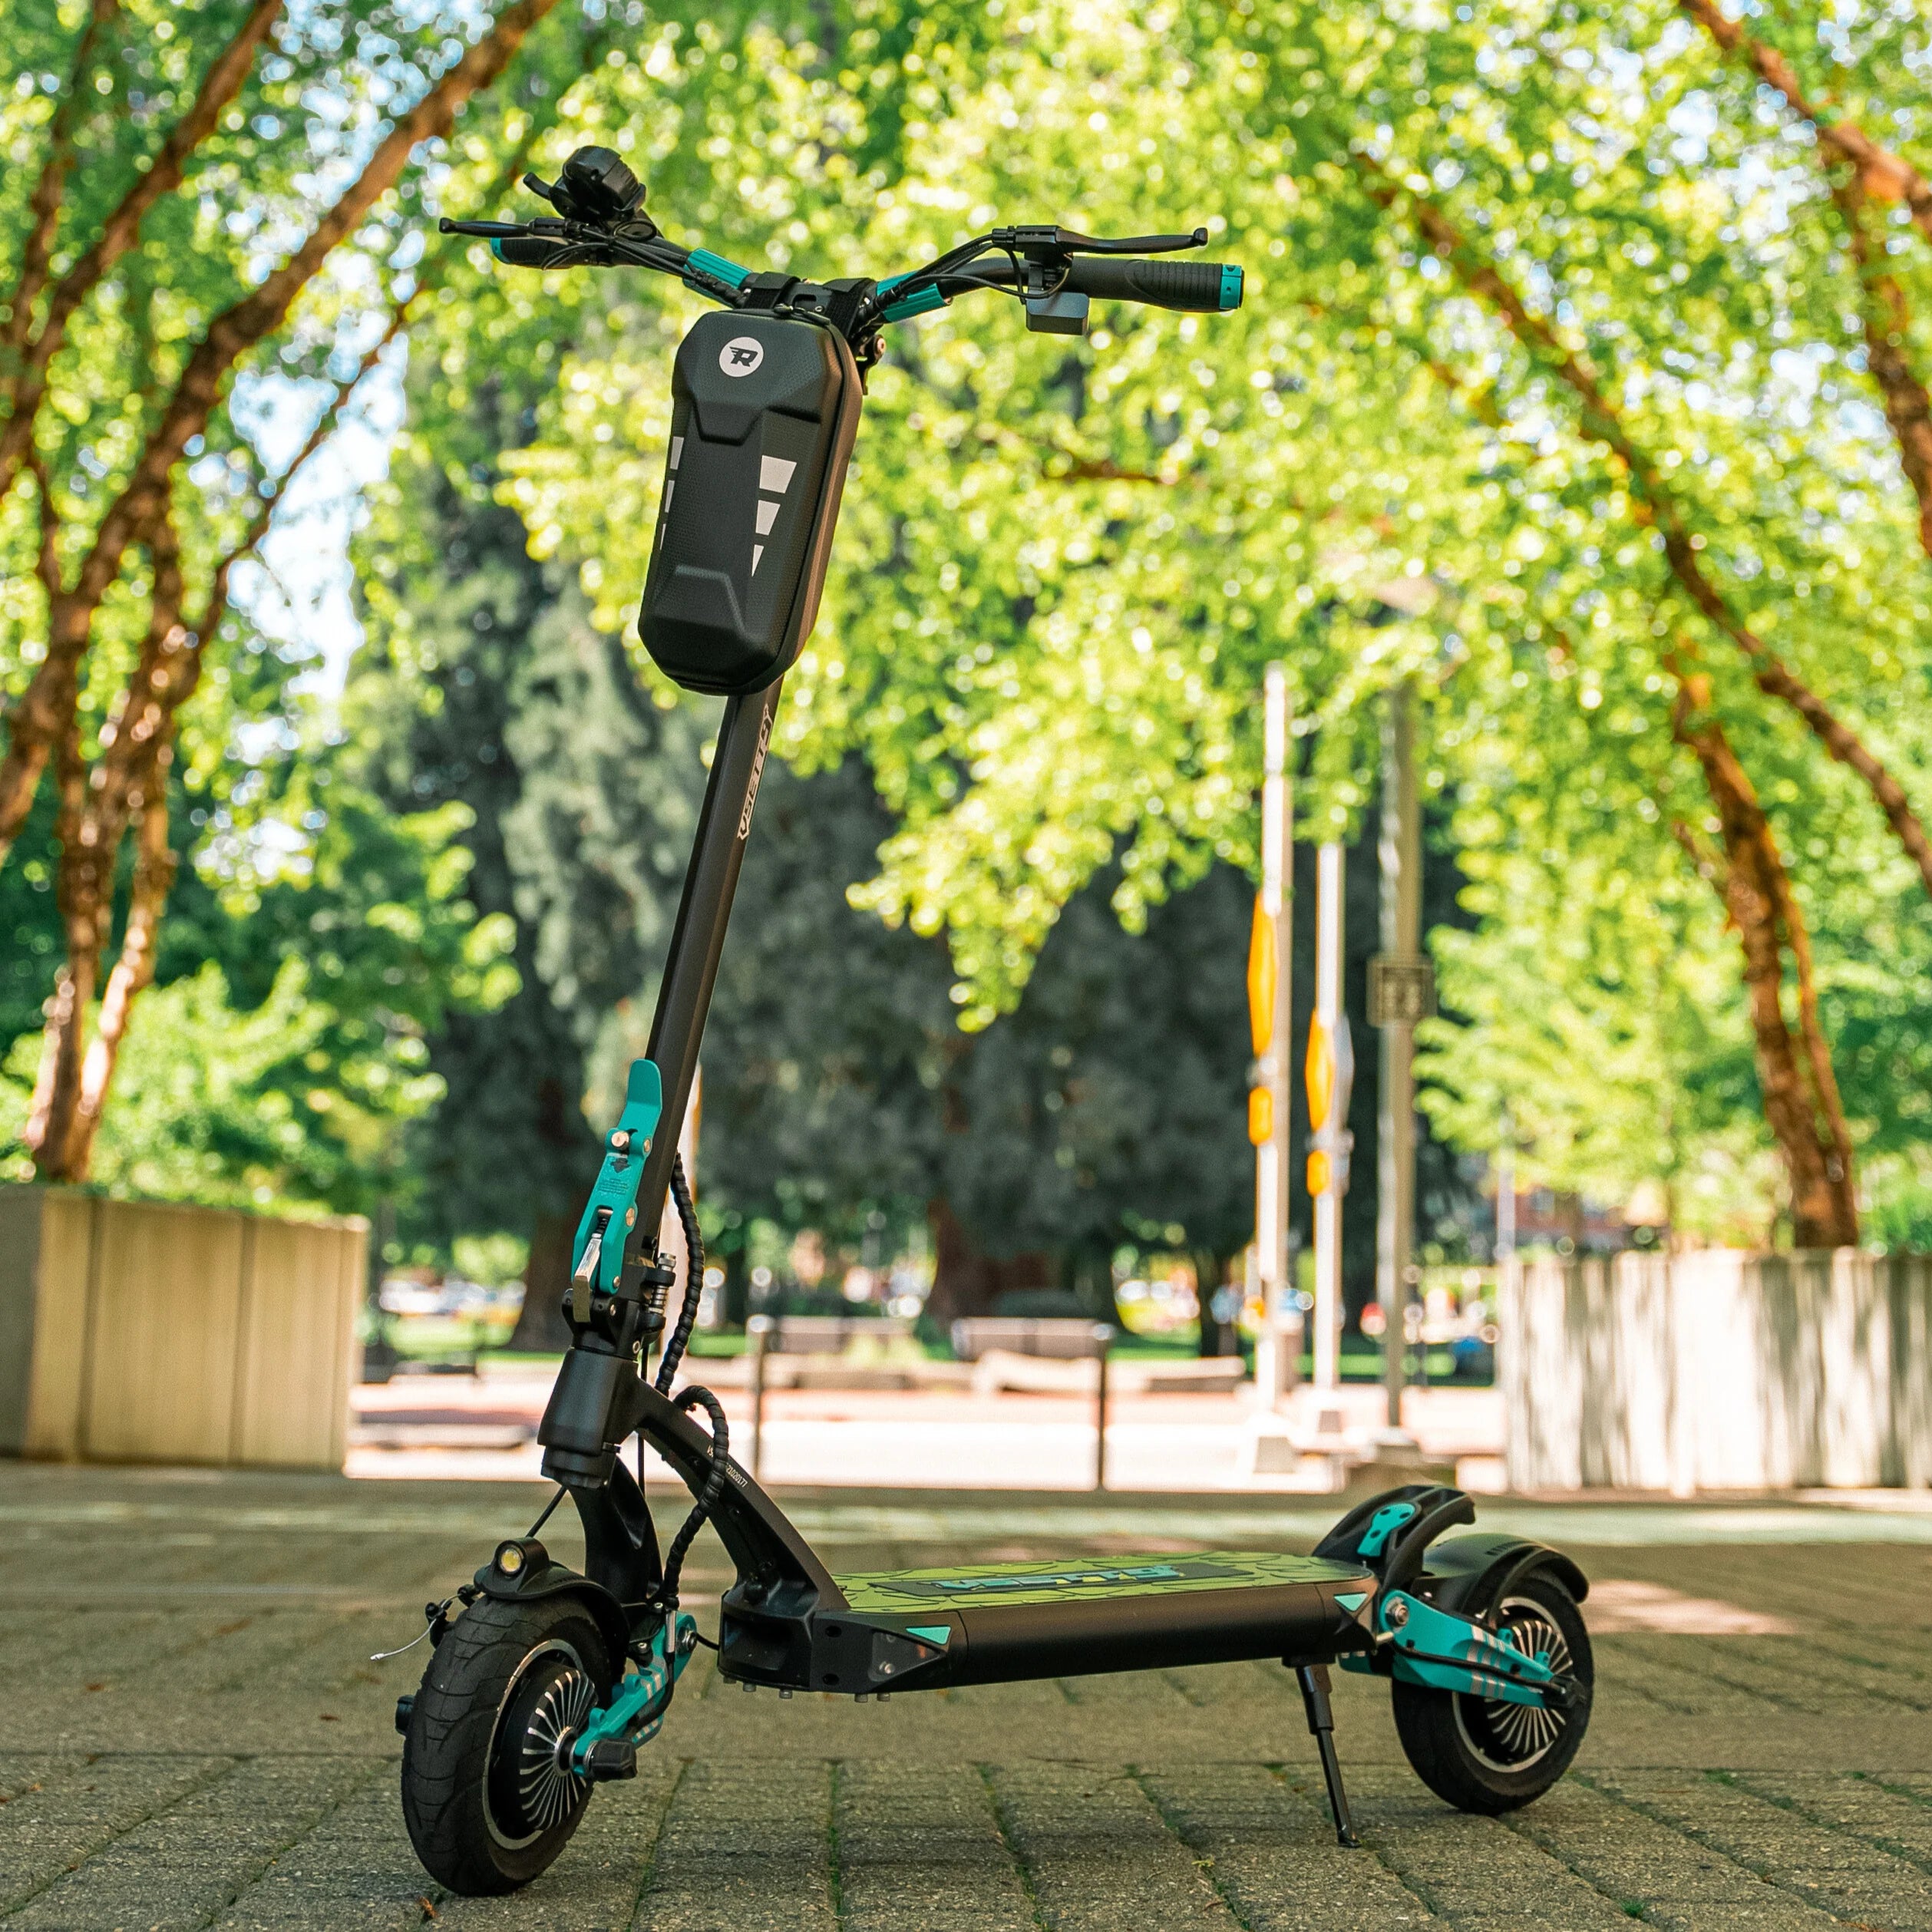 Best electric scooters from VSETT, Navee, Segway - Electric scooters near you